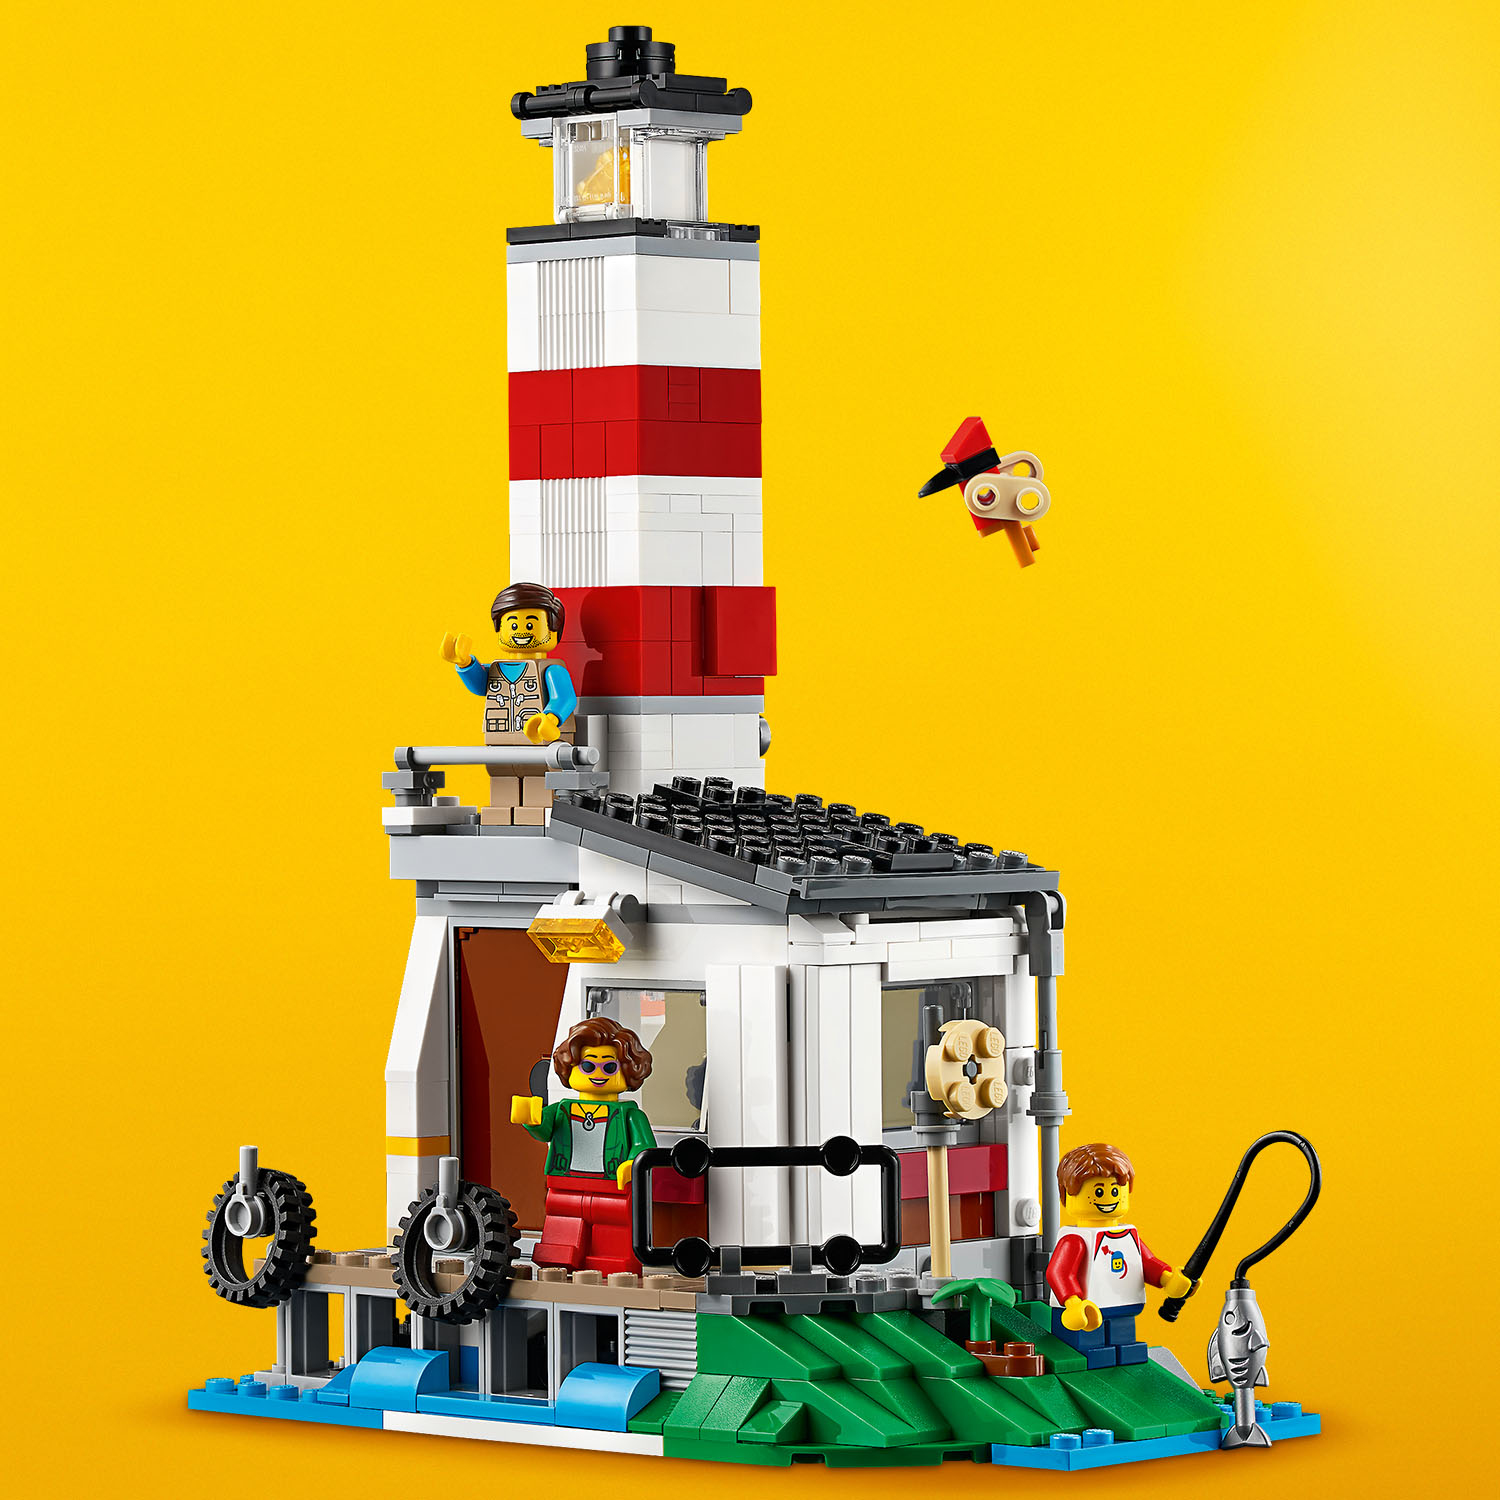 Lighthouse with an office